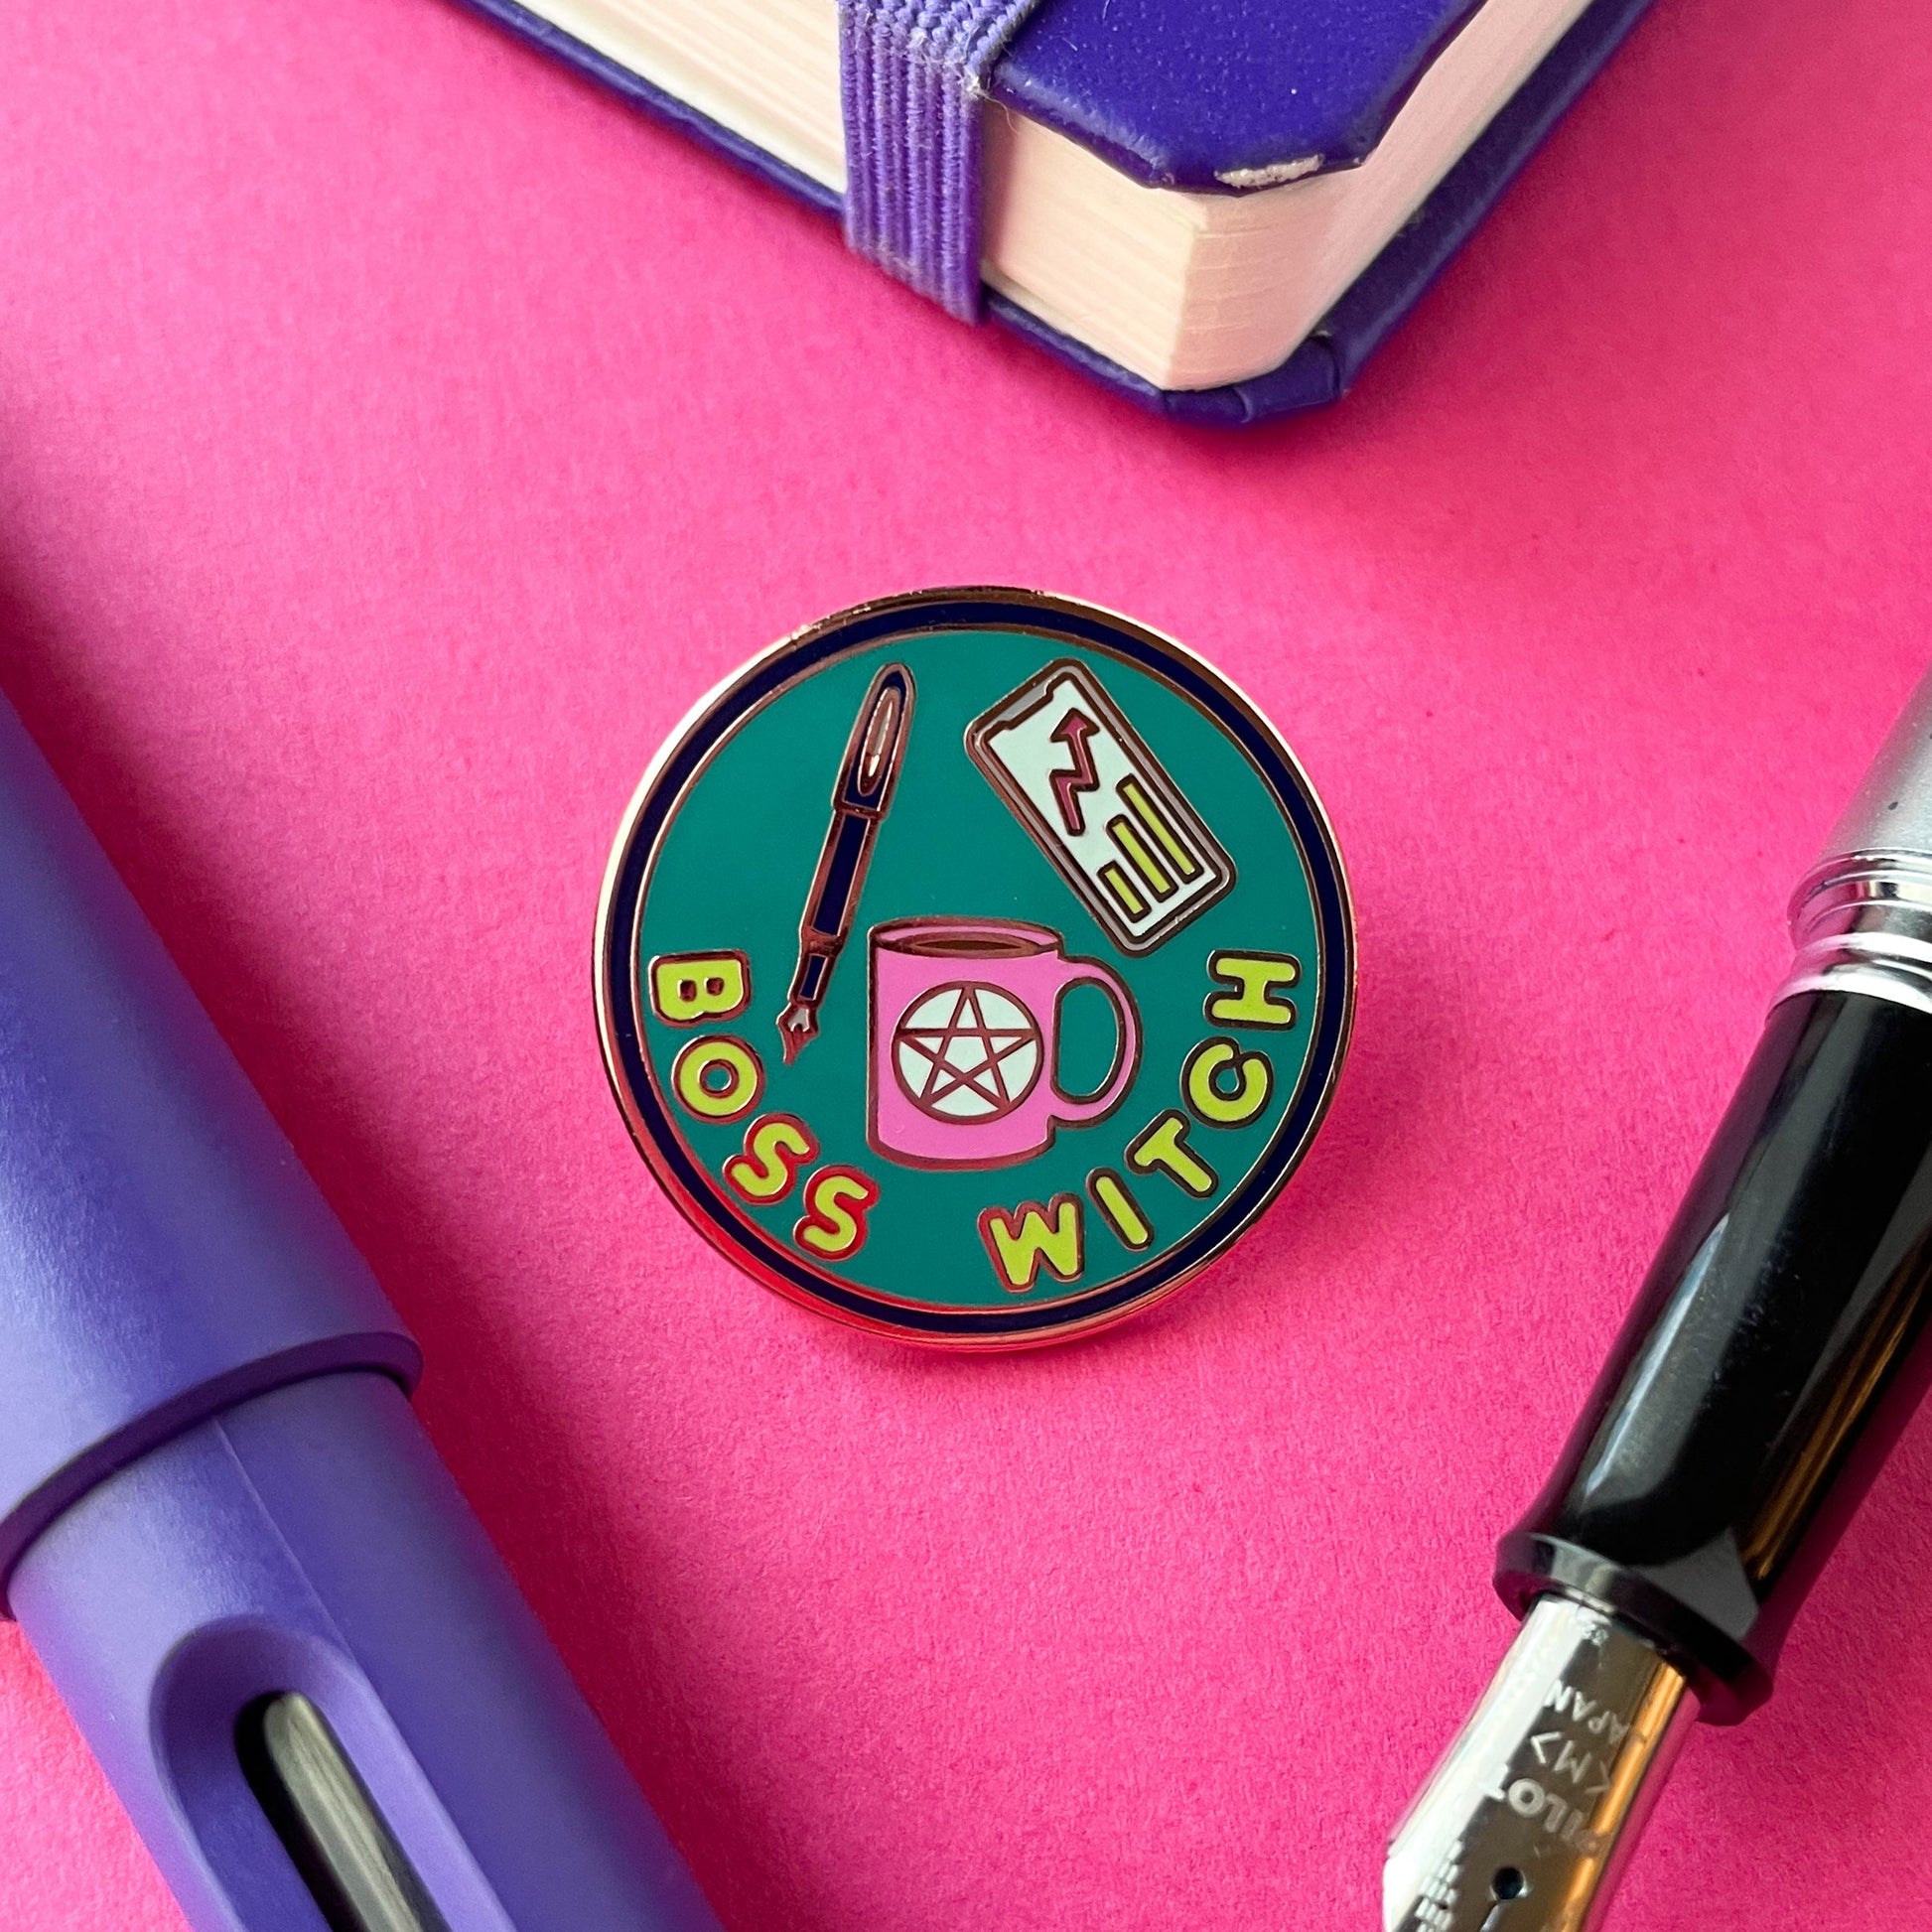 A circular enamel pin on a hot pink background surrounded by fountain pens and a notebook corner. The pin says "Boss Witch" and has a coffee cup with a pentacle, a fountain pen, and a phone with a graph on it depicted on it.